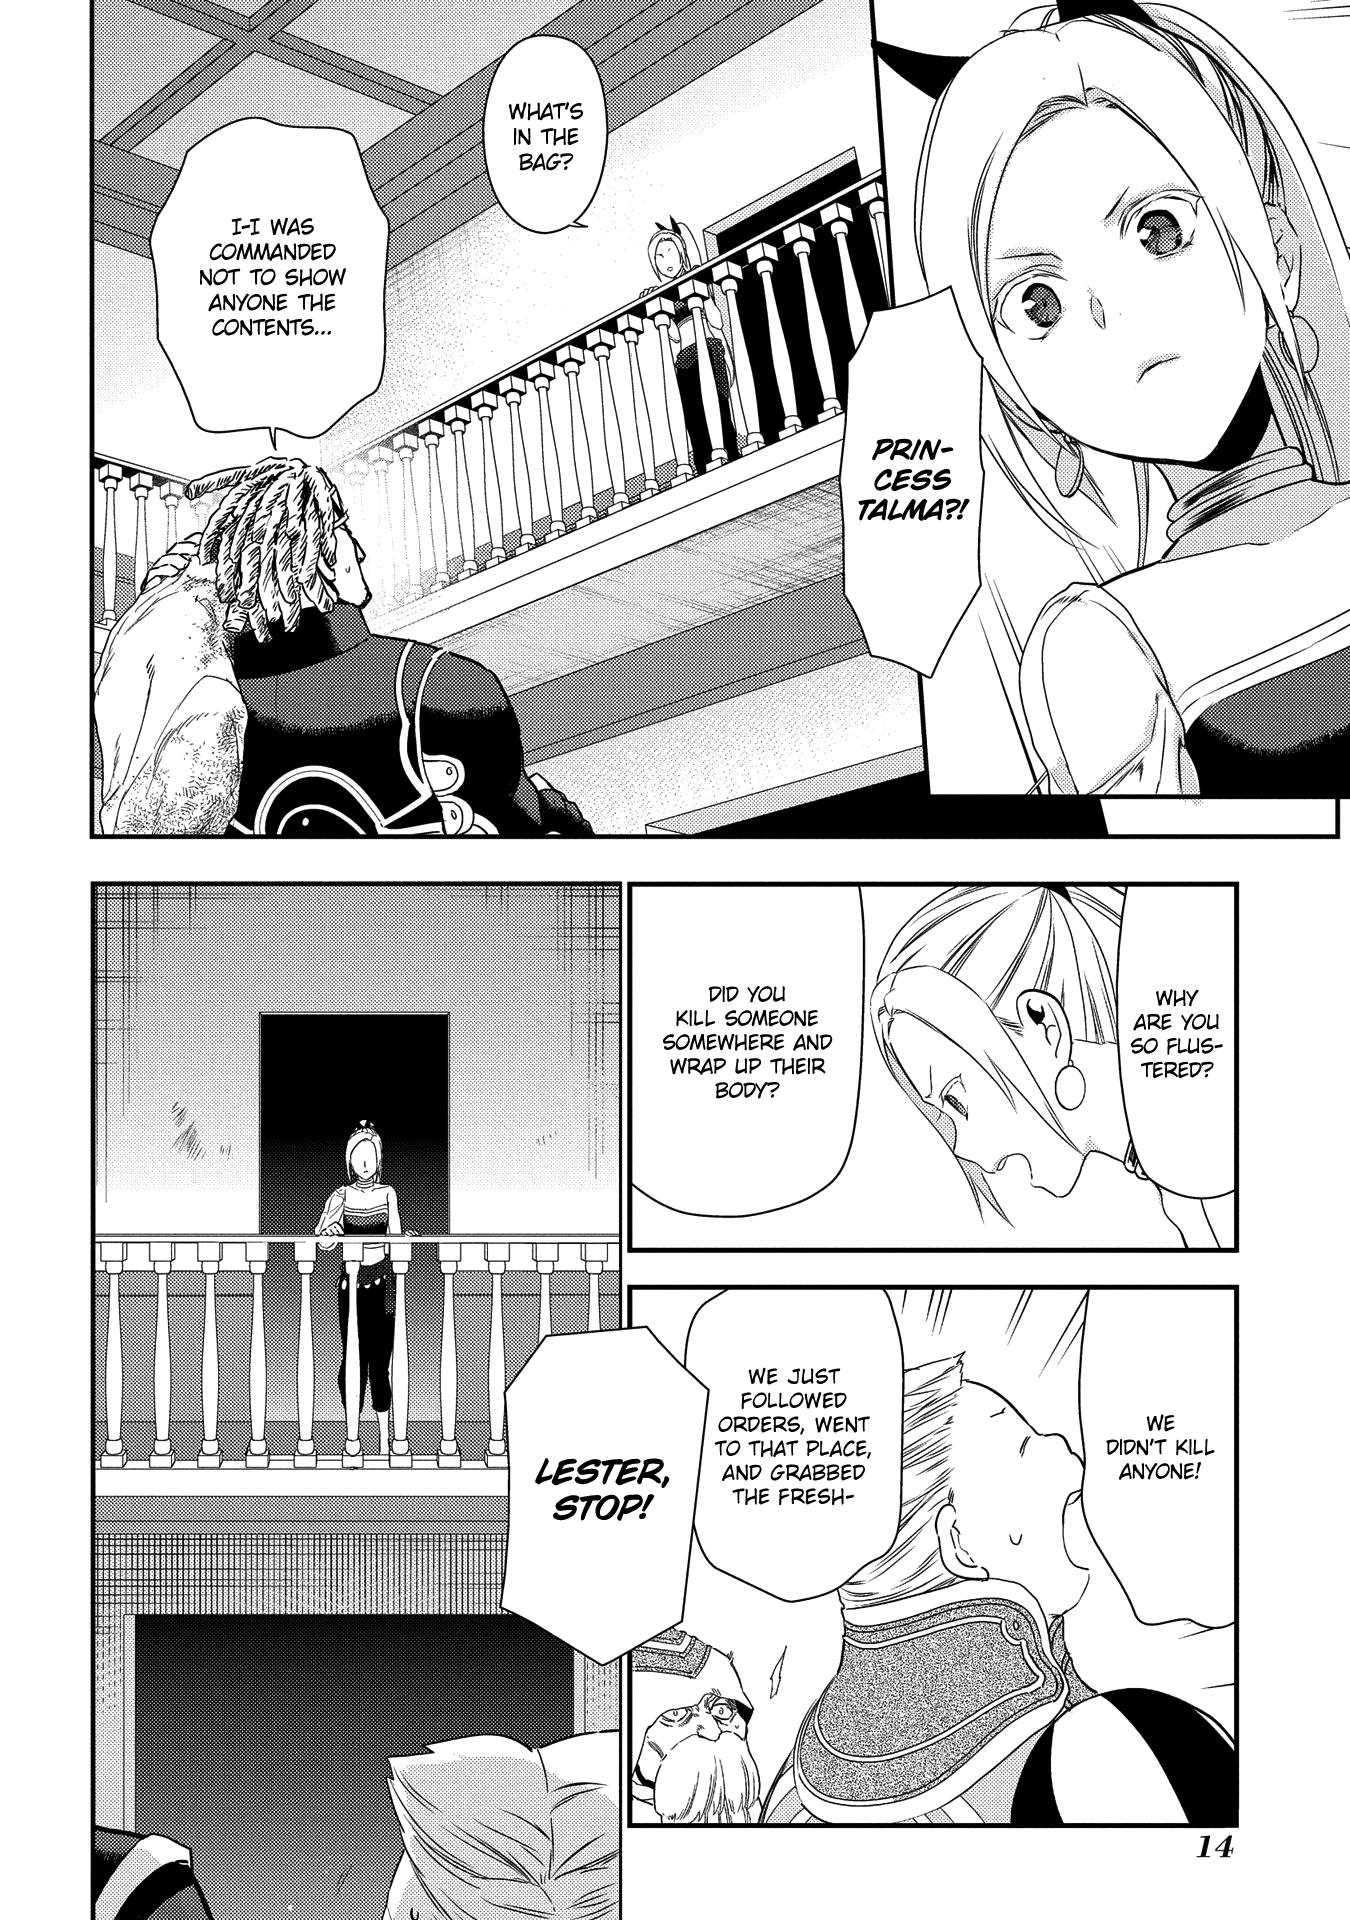 Rain (SUMIKAWA Megumi) Vol.17 Chapter 89: A Ghost From The Past